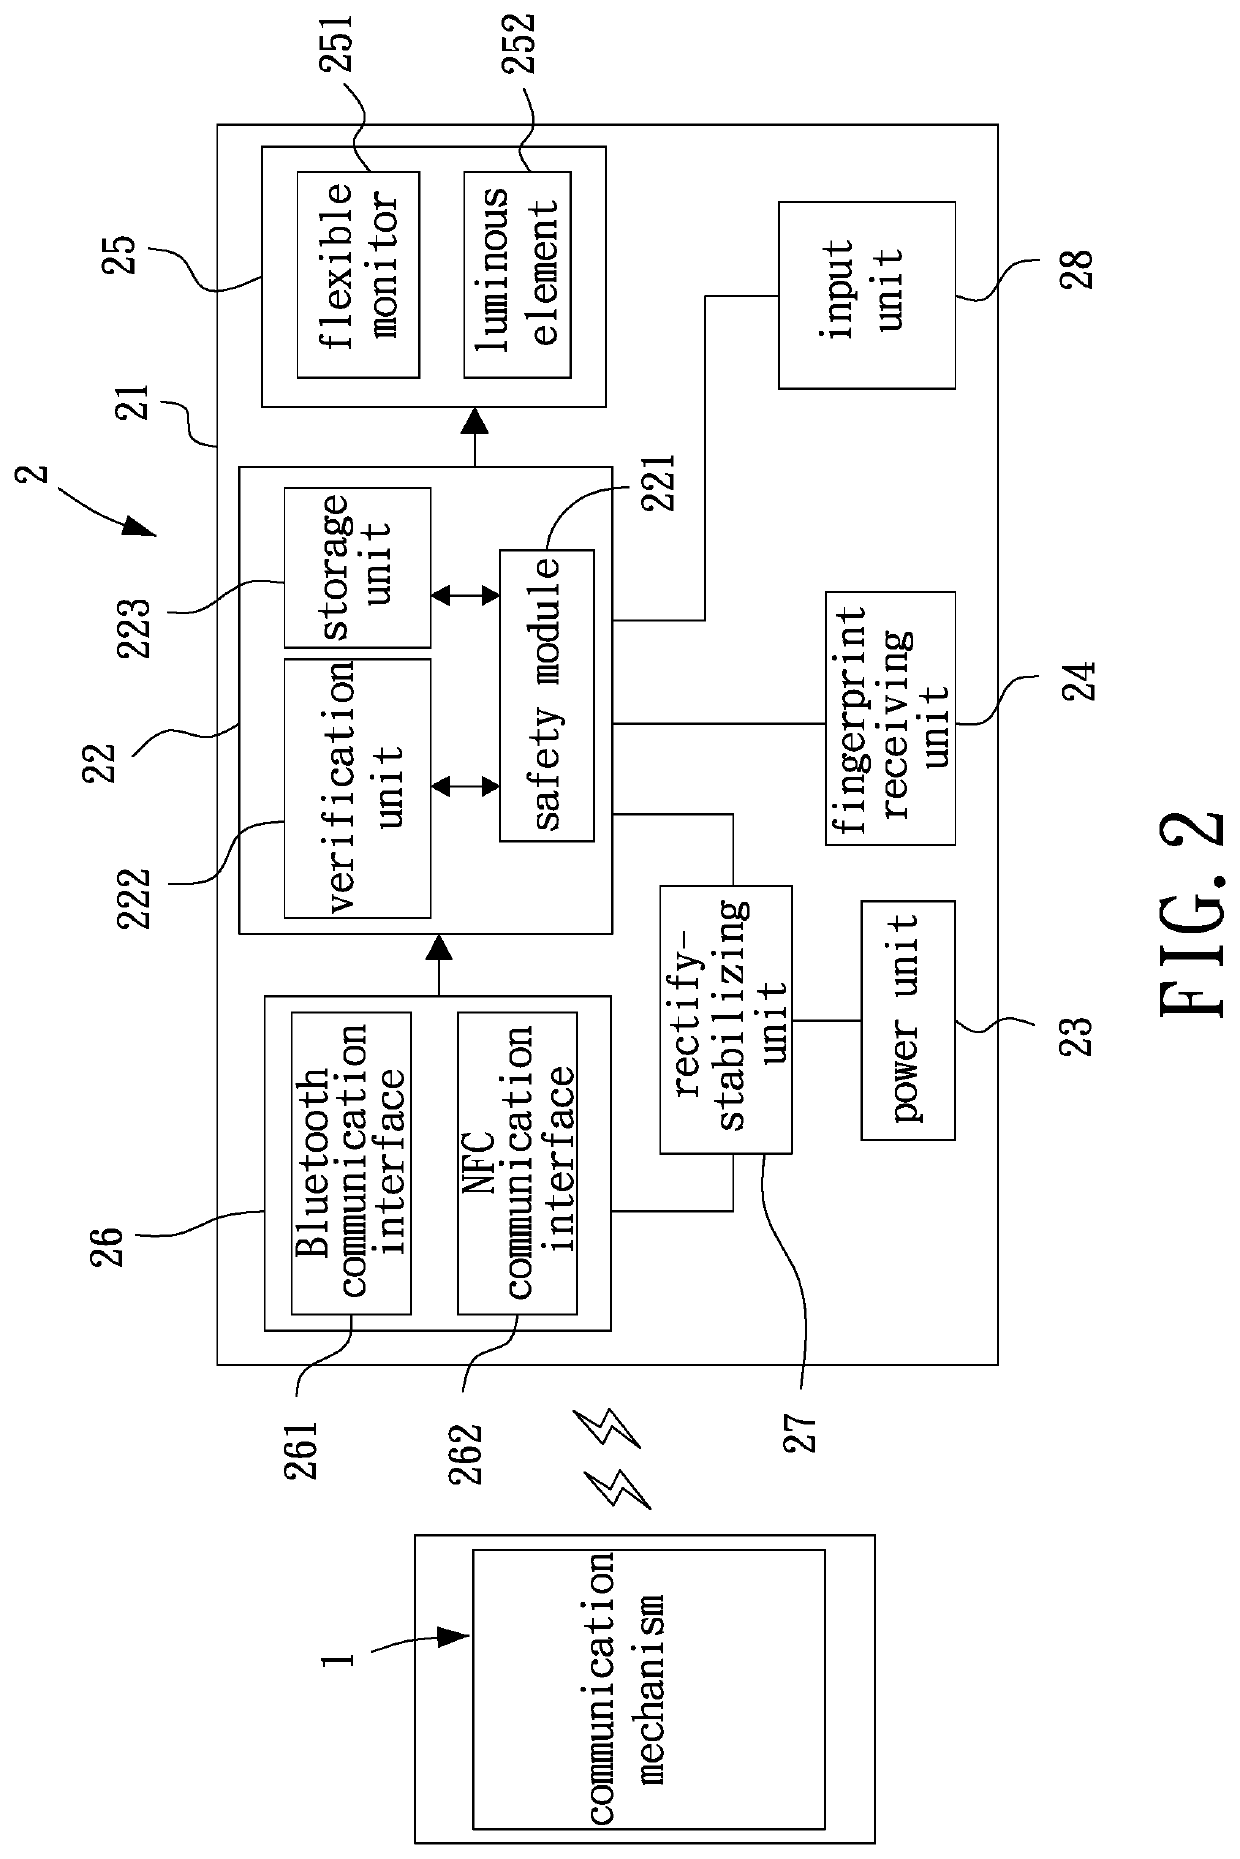 Virtual currency storage and transaction device